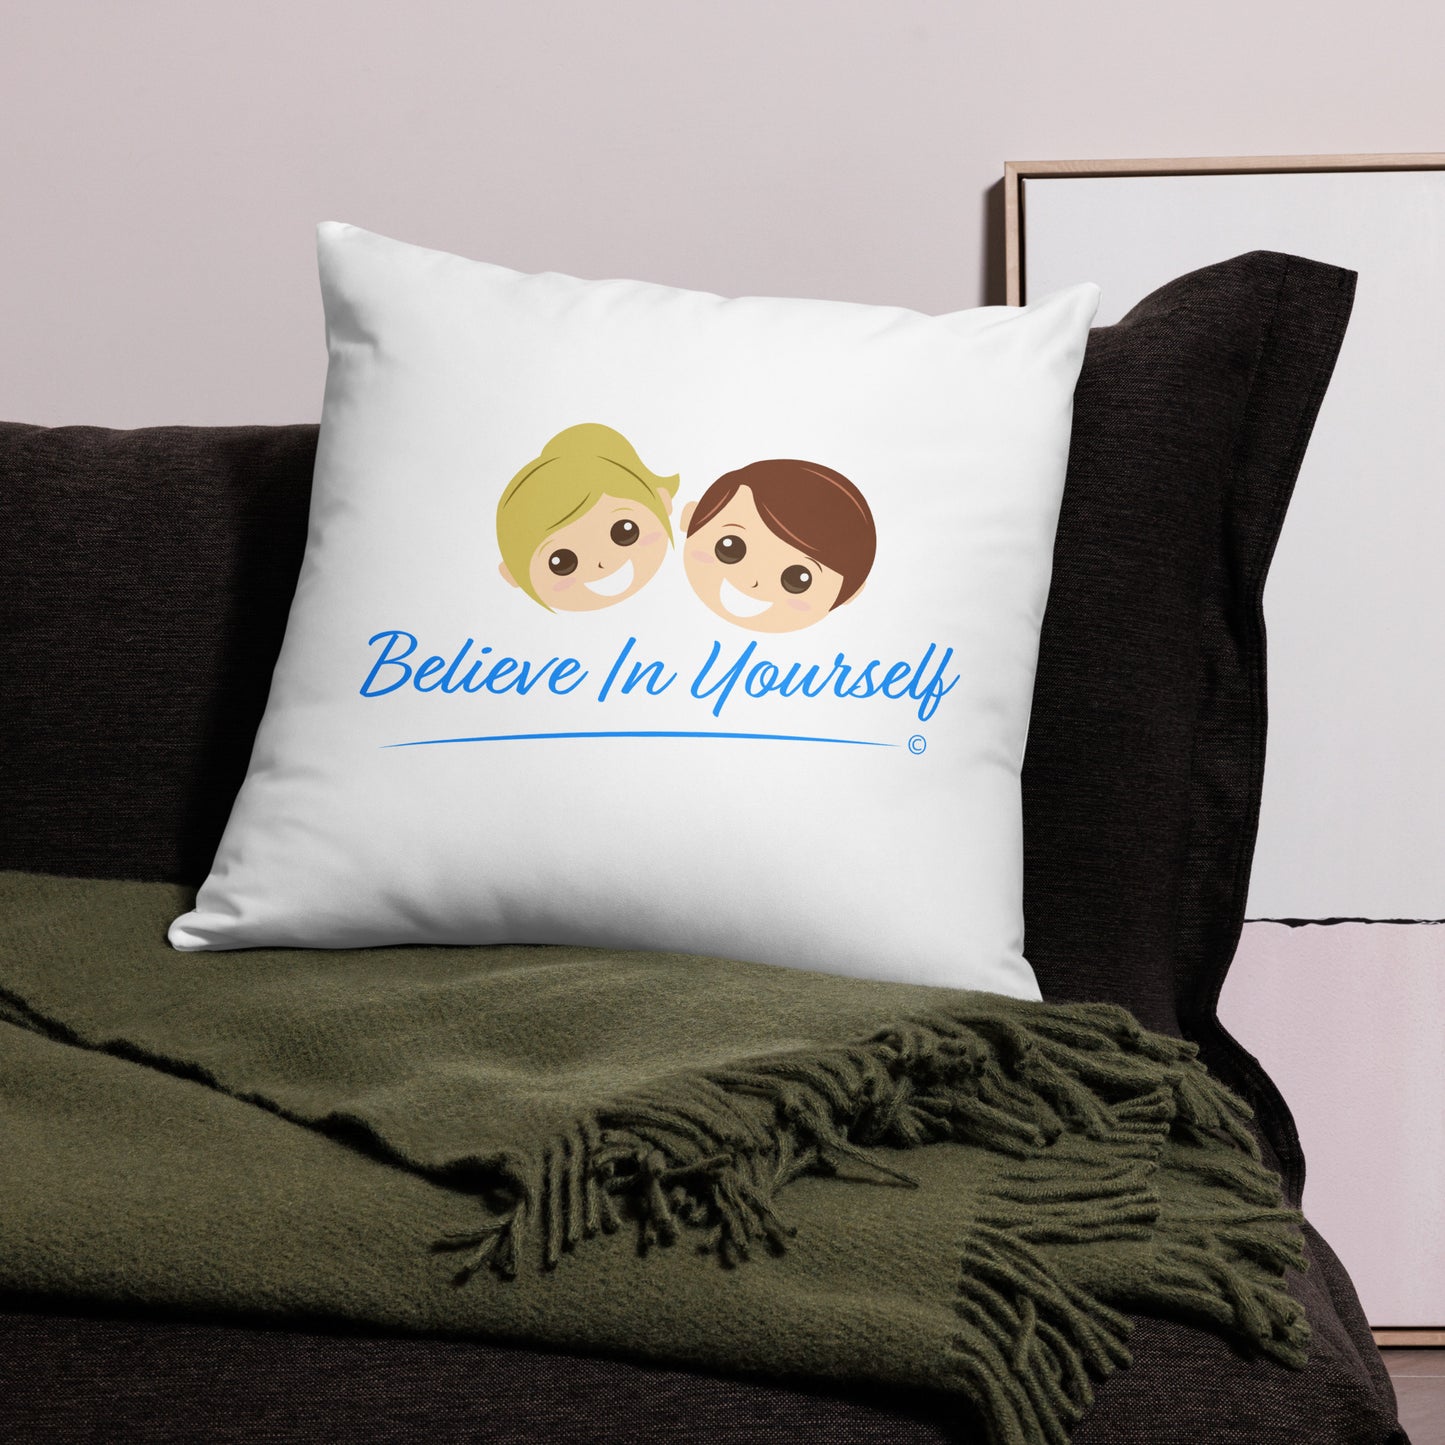 Confidence-boosting 22x22 throw pillow featuring the empowering words 'Believe in Yourself,' making a statement on a black bed and a trendy green scarf.